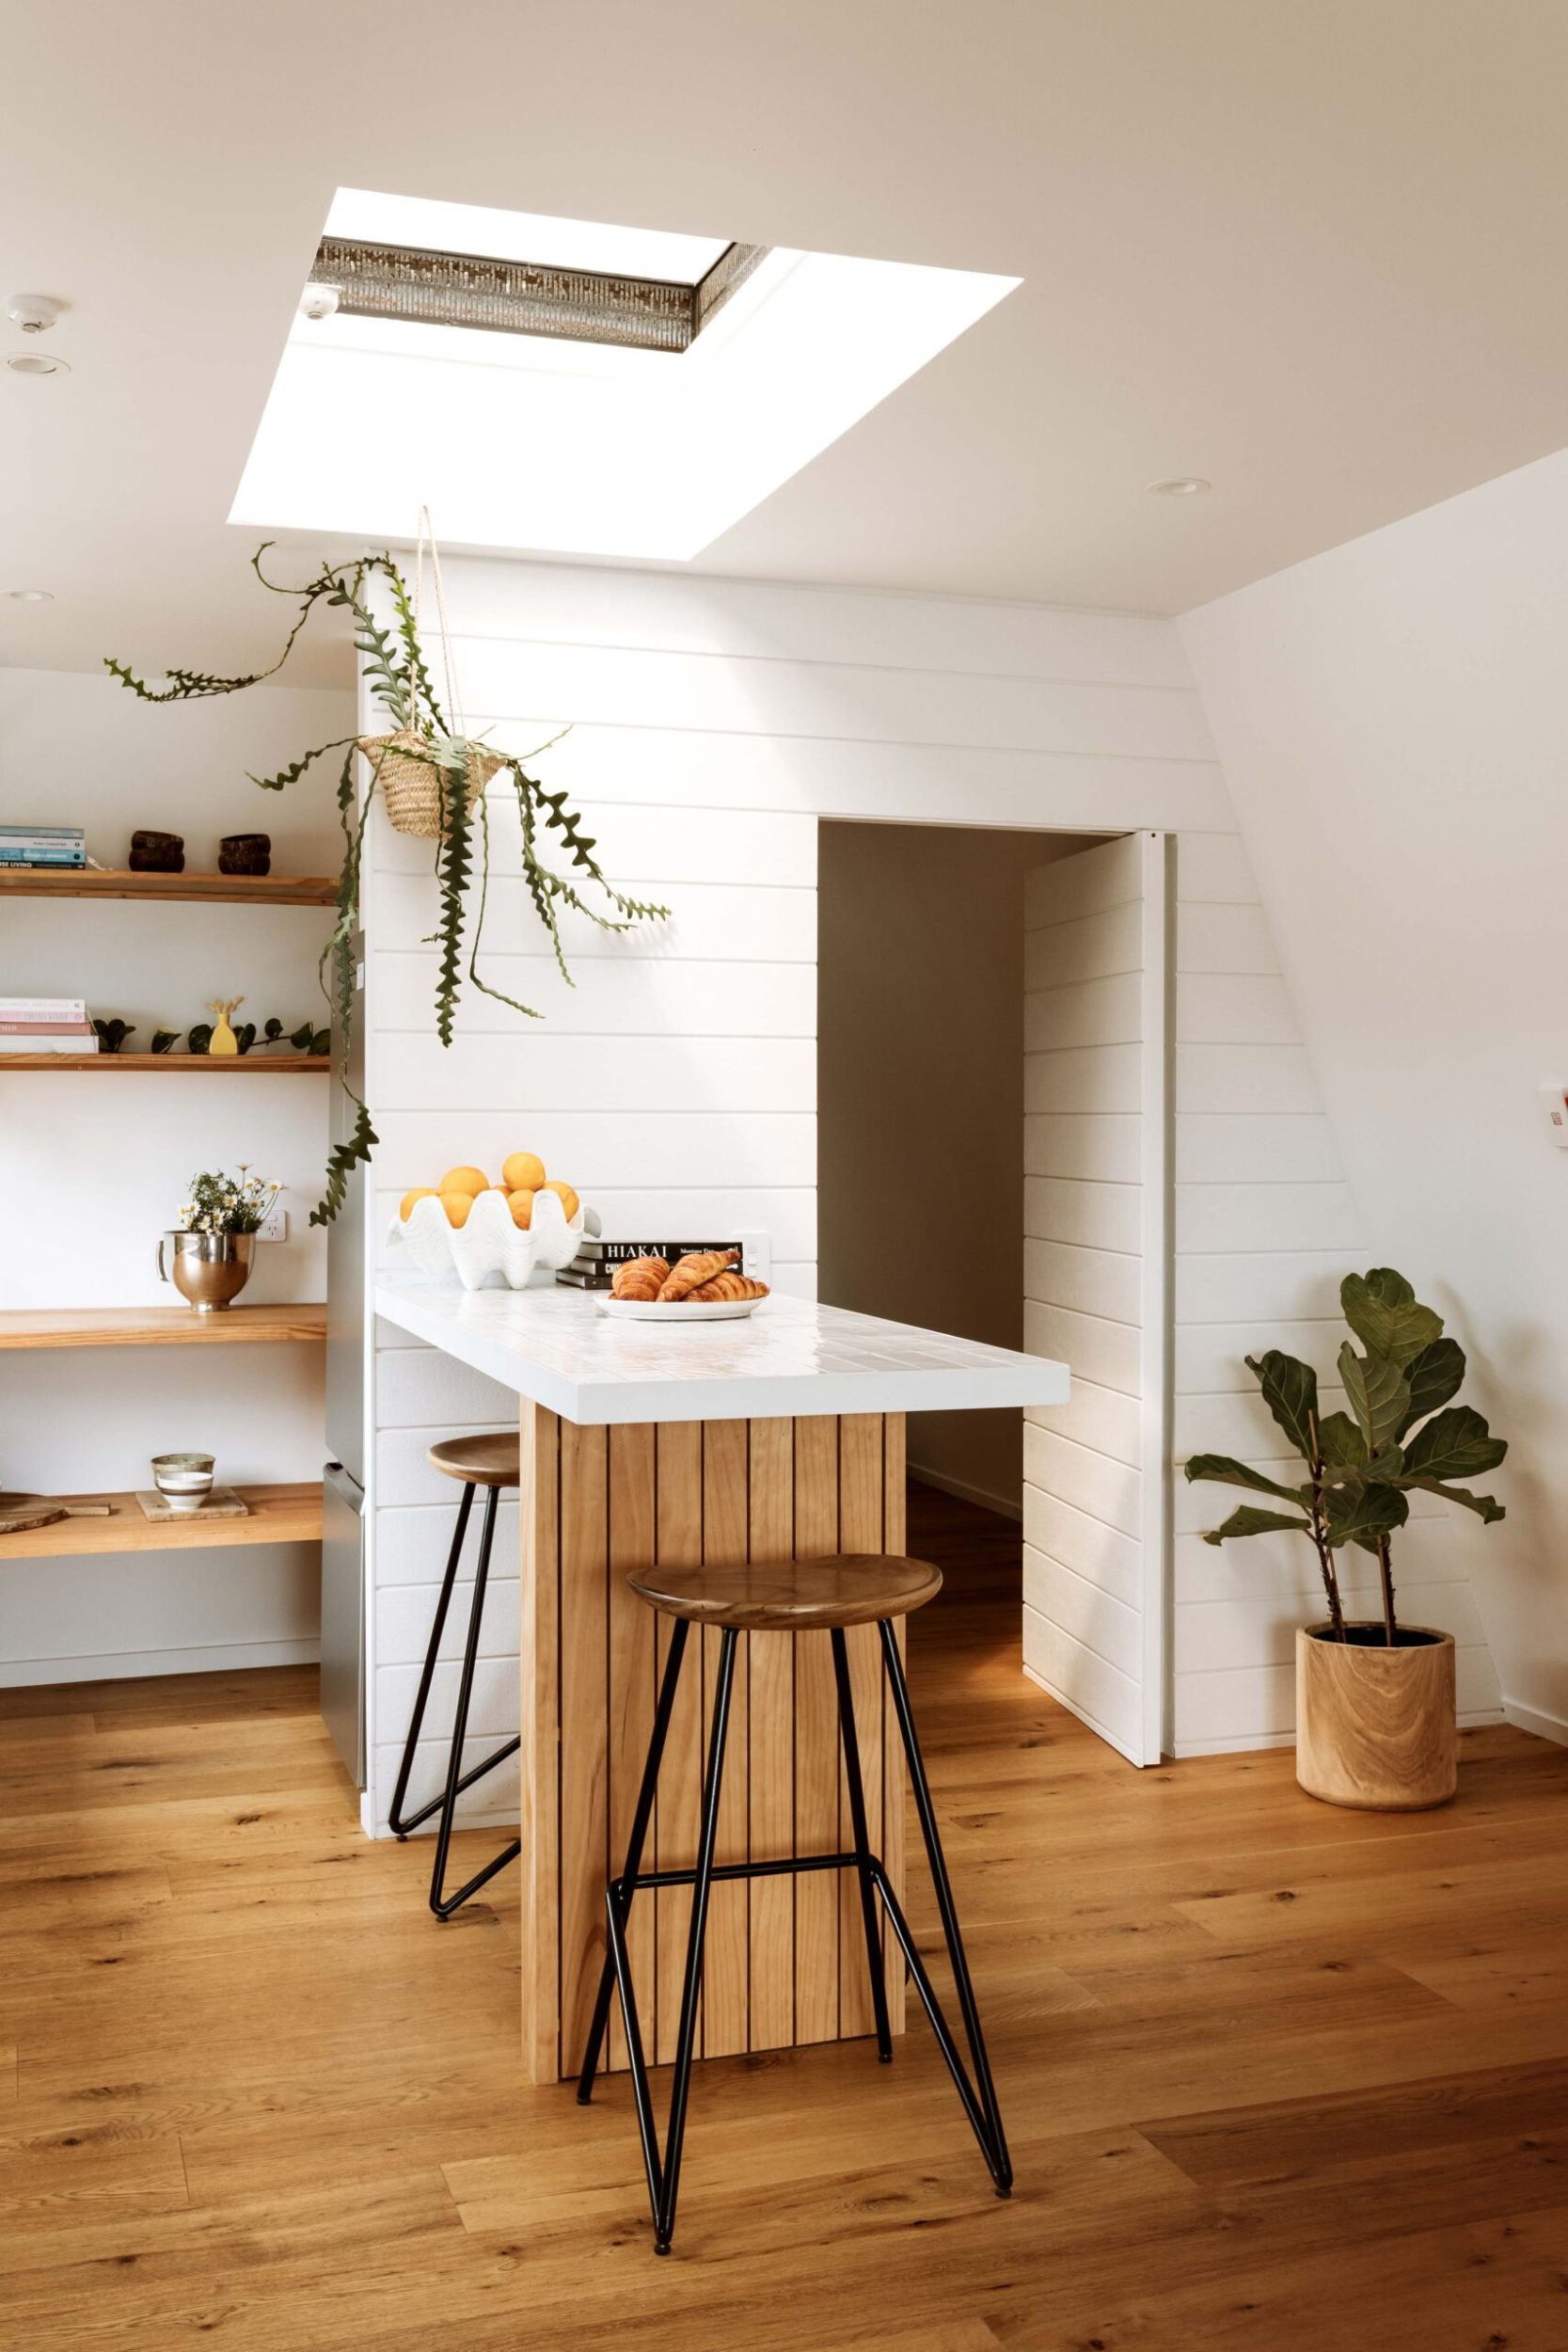 A bright, white kitchen with wooden flooring and panelling up the island, floating wooden shelves are in the corner